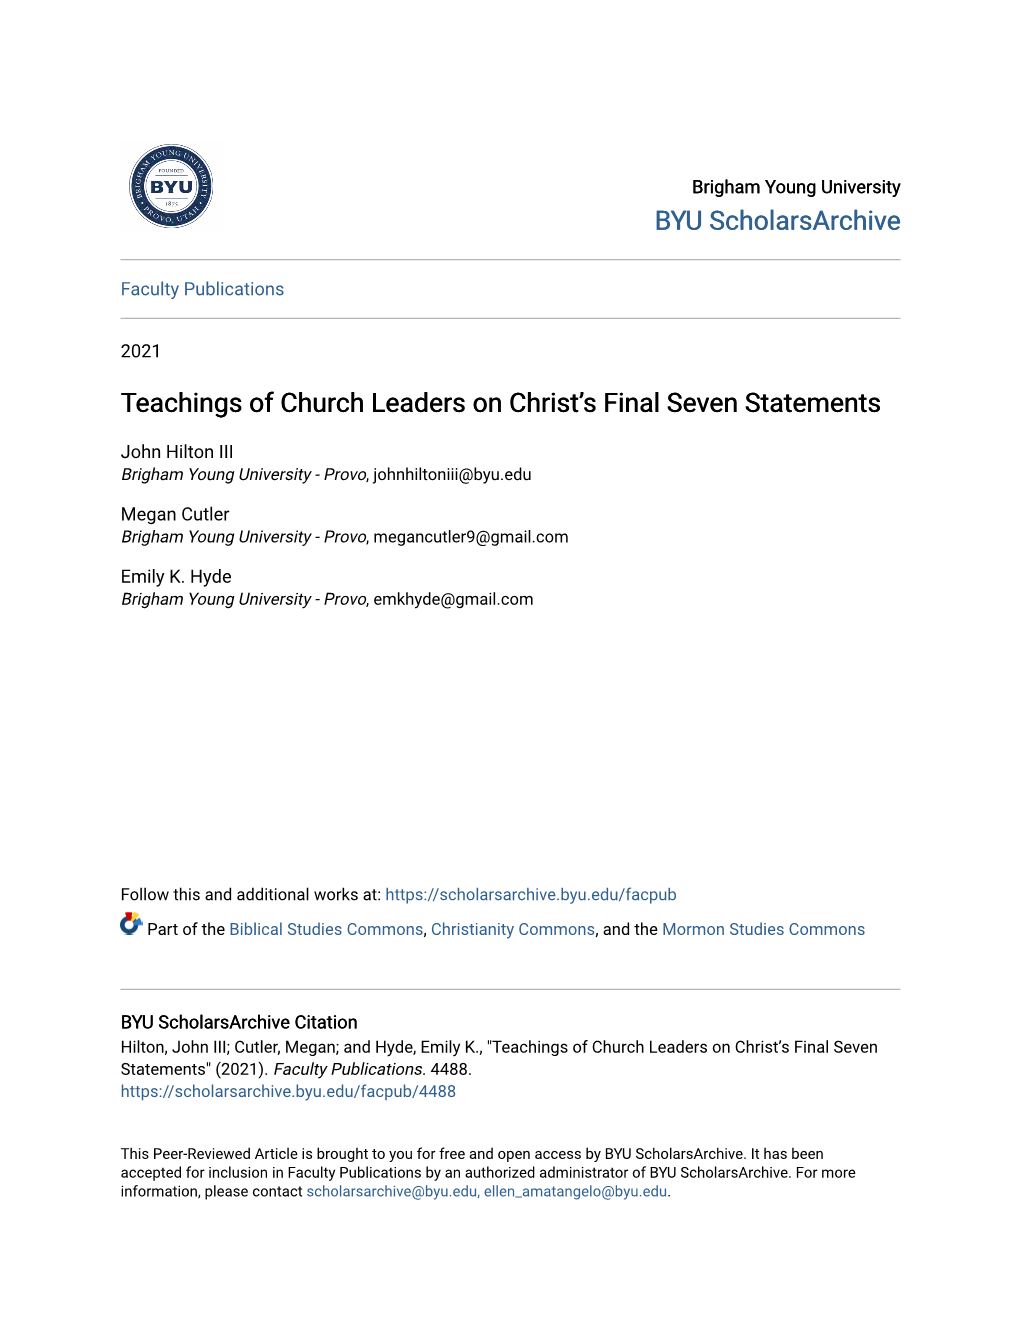 Teachings of Church Leaders on Christ's Final Seven Statements